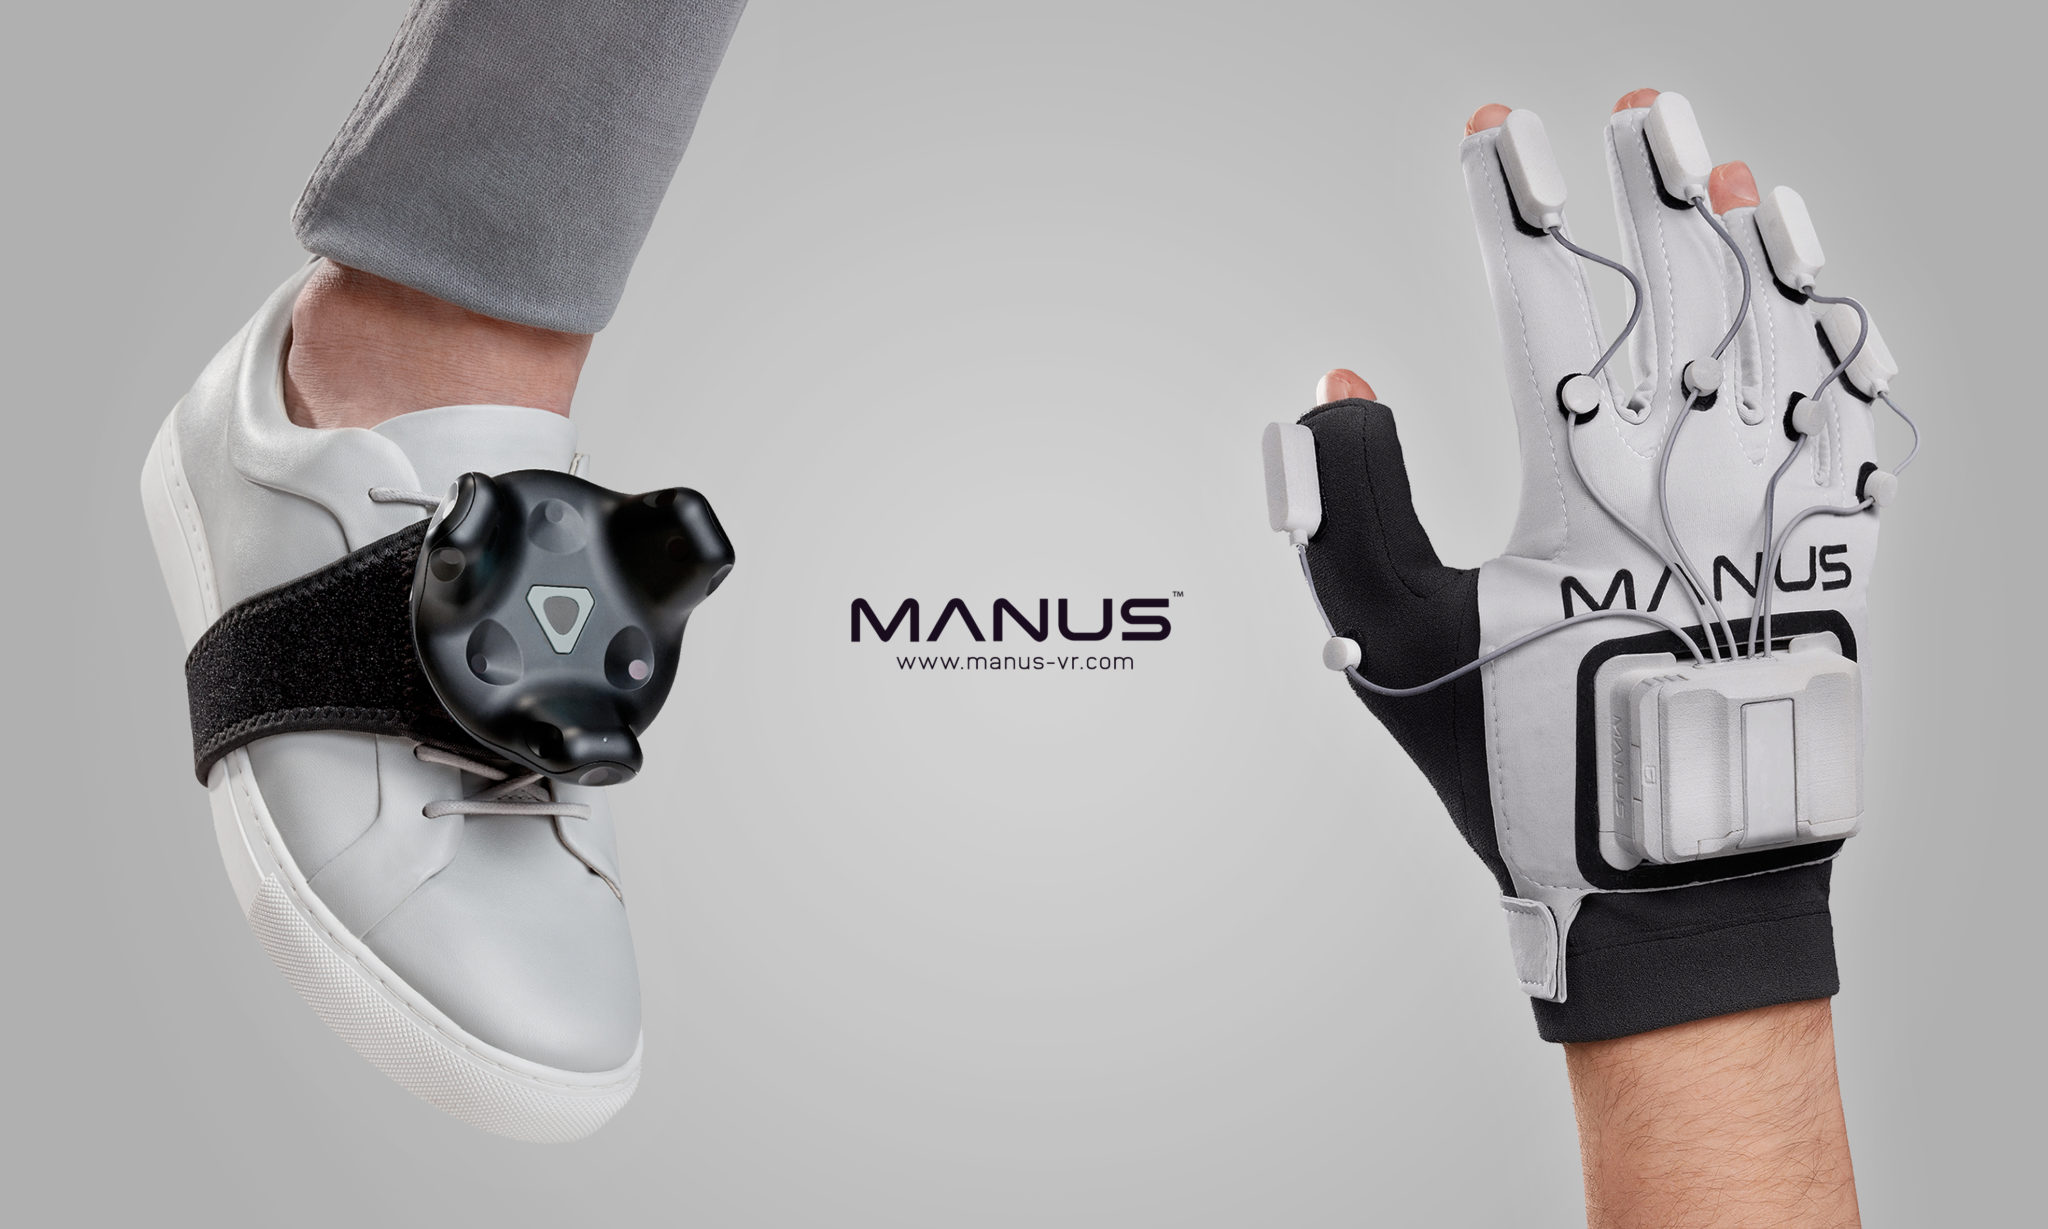 Manus launches full-body tracking for Virtual Reality, as well as its Prime gloves for Auganix.org